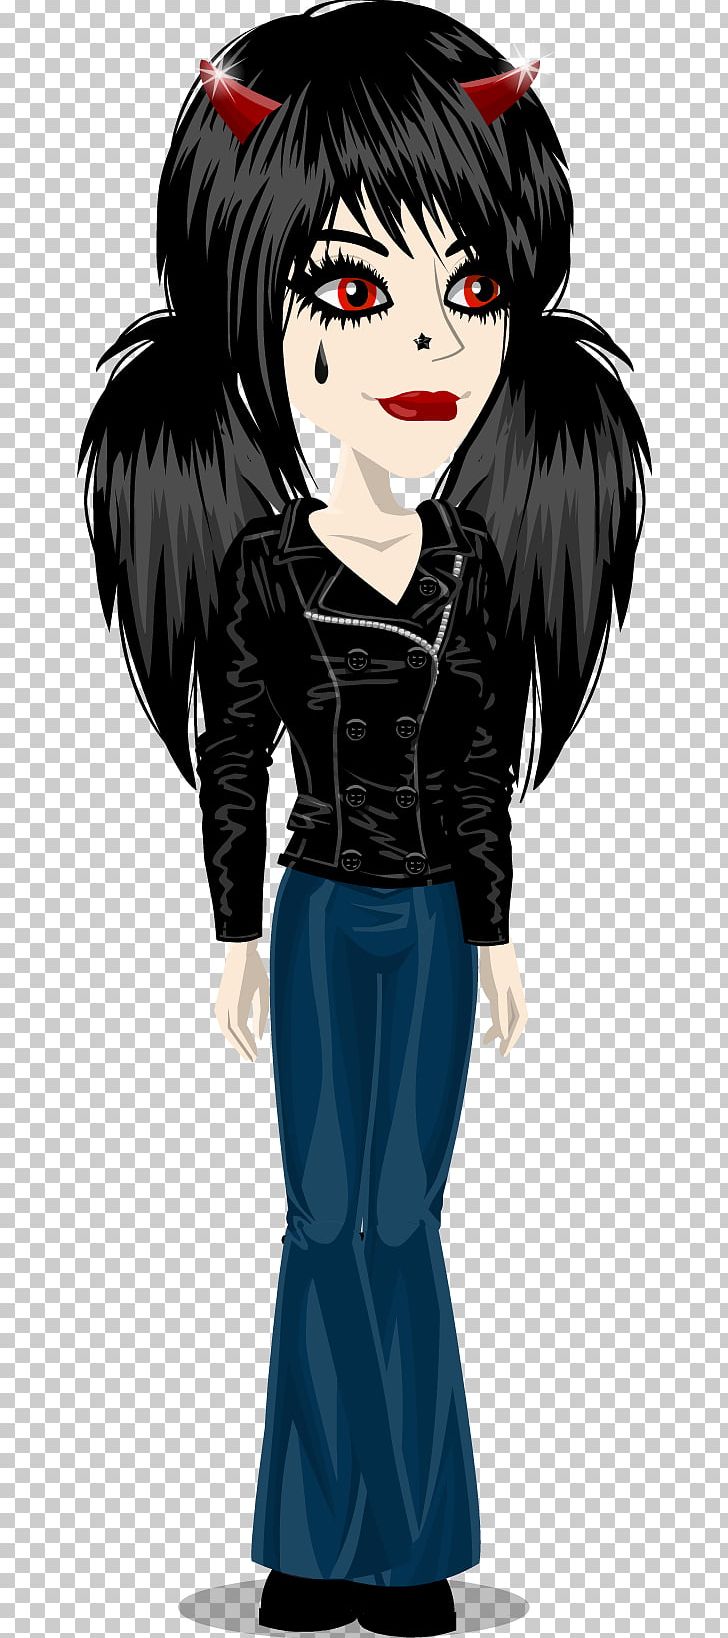 Drawing Emo Png Clipart Anime Art Art Museum Black